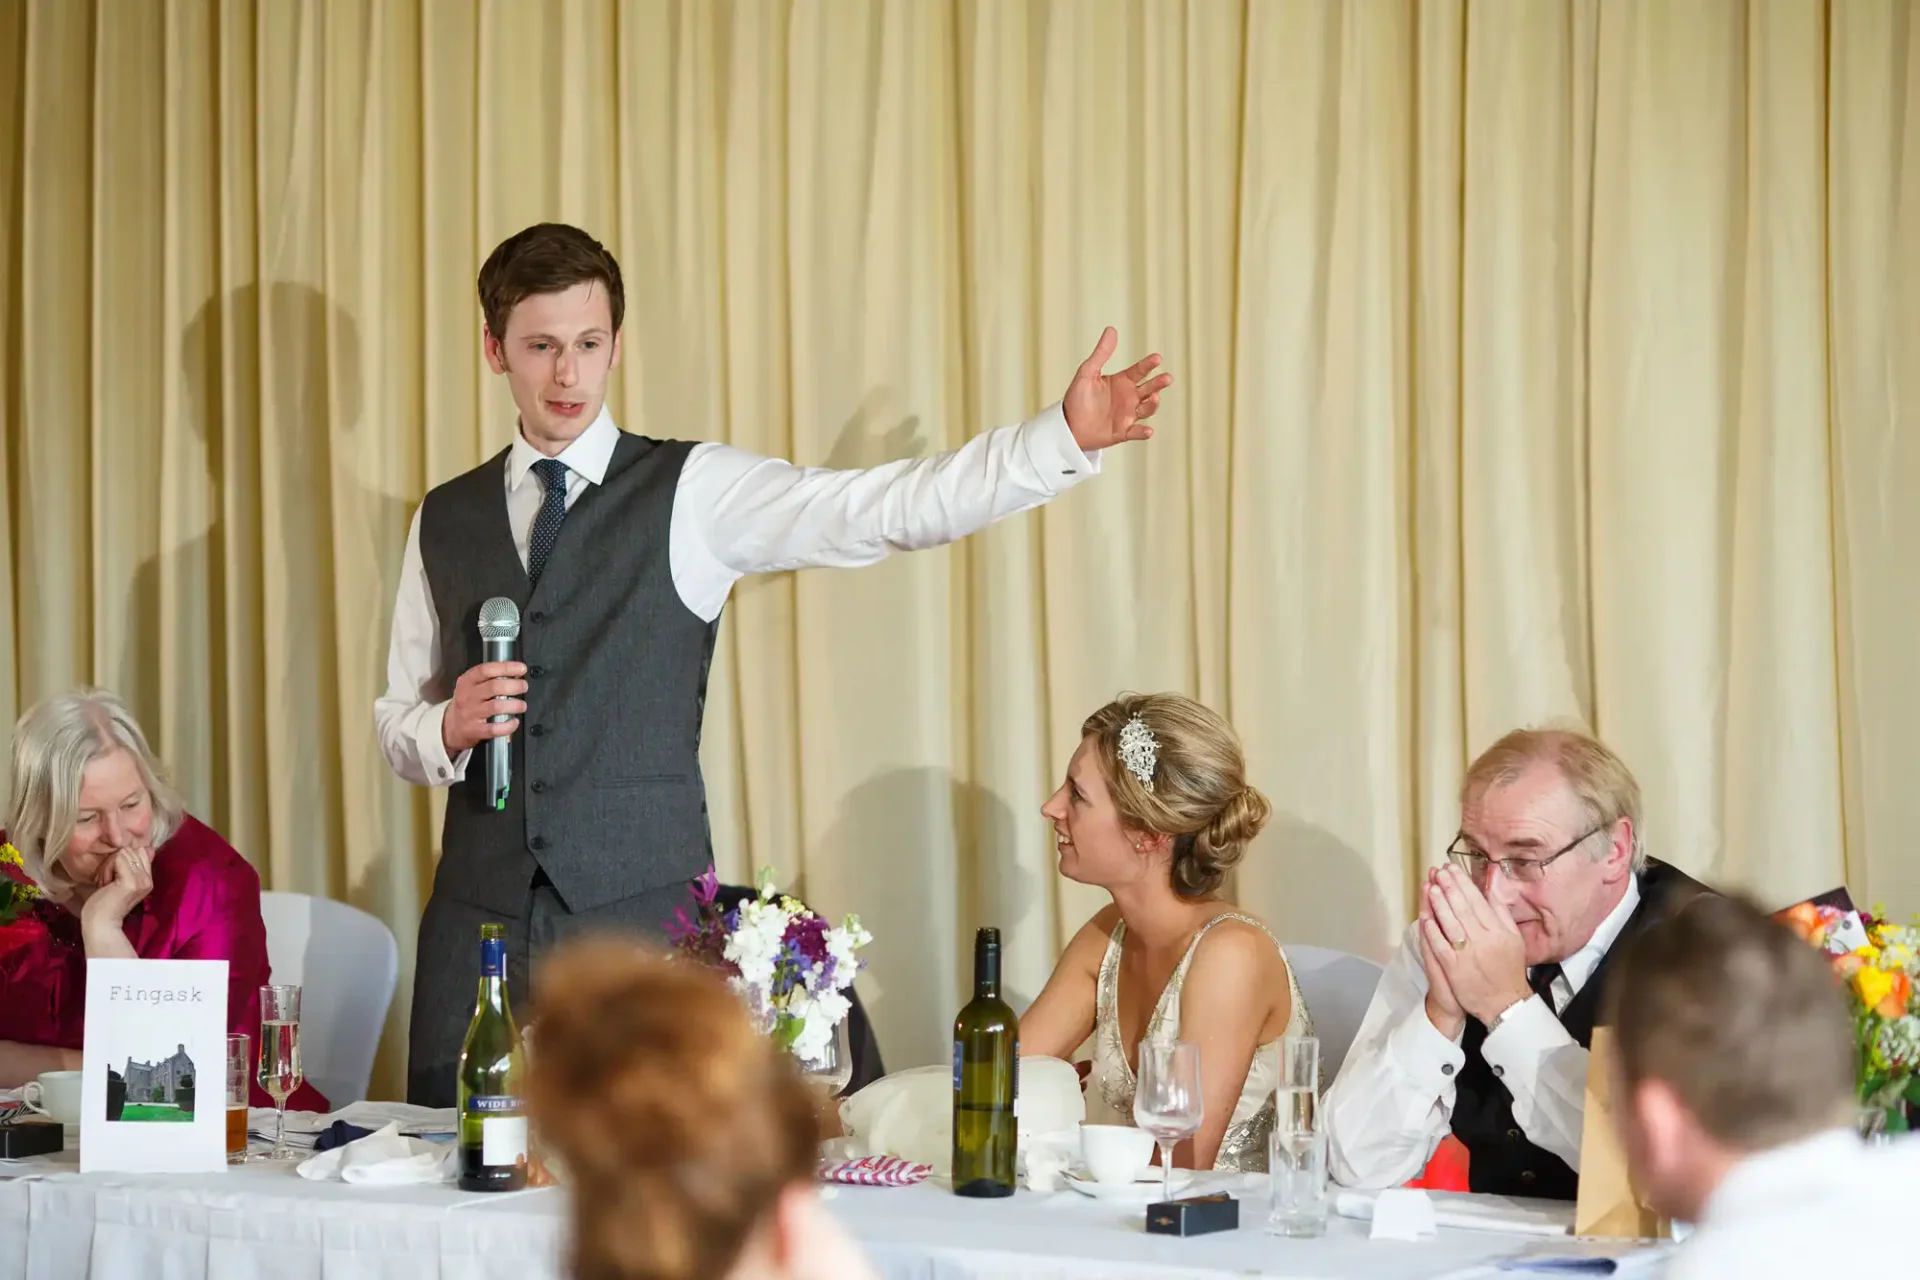 A man giving a speech at a wedding reception, gesturing with his hand, while holding a microphone. the bride and guests are seated at the table, listening.